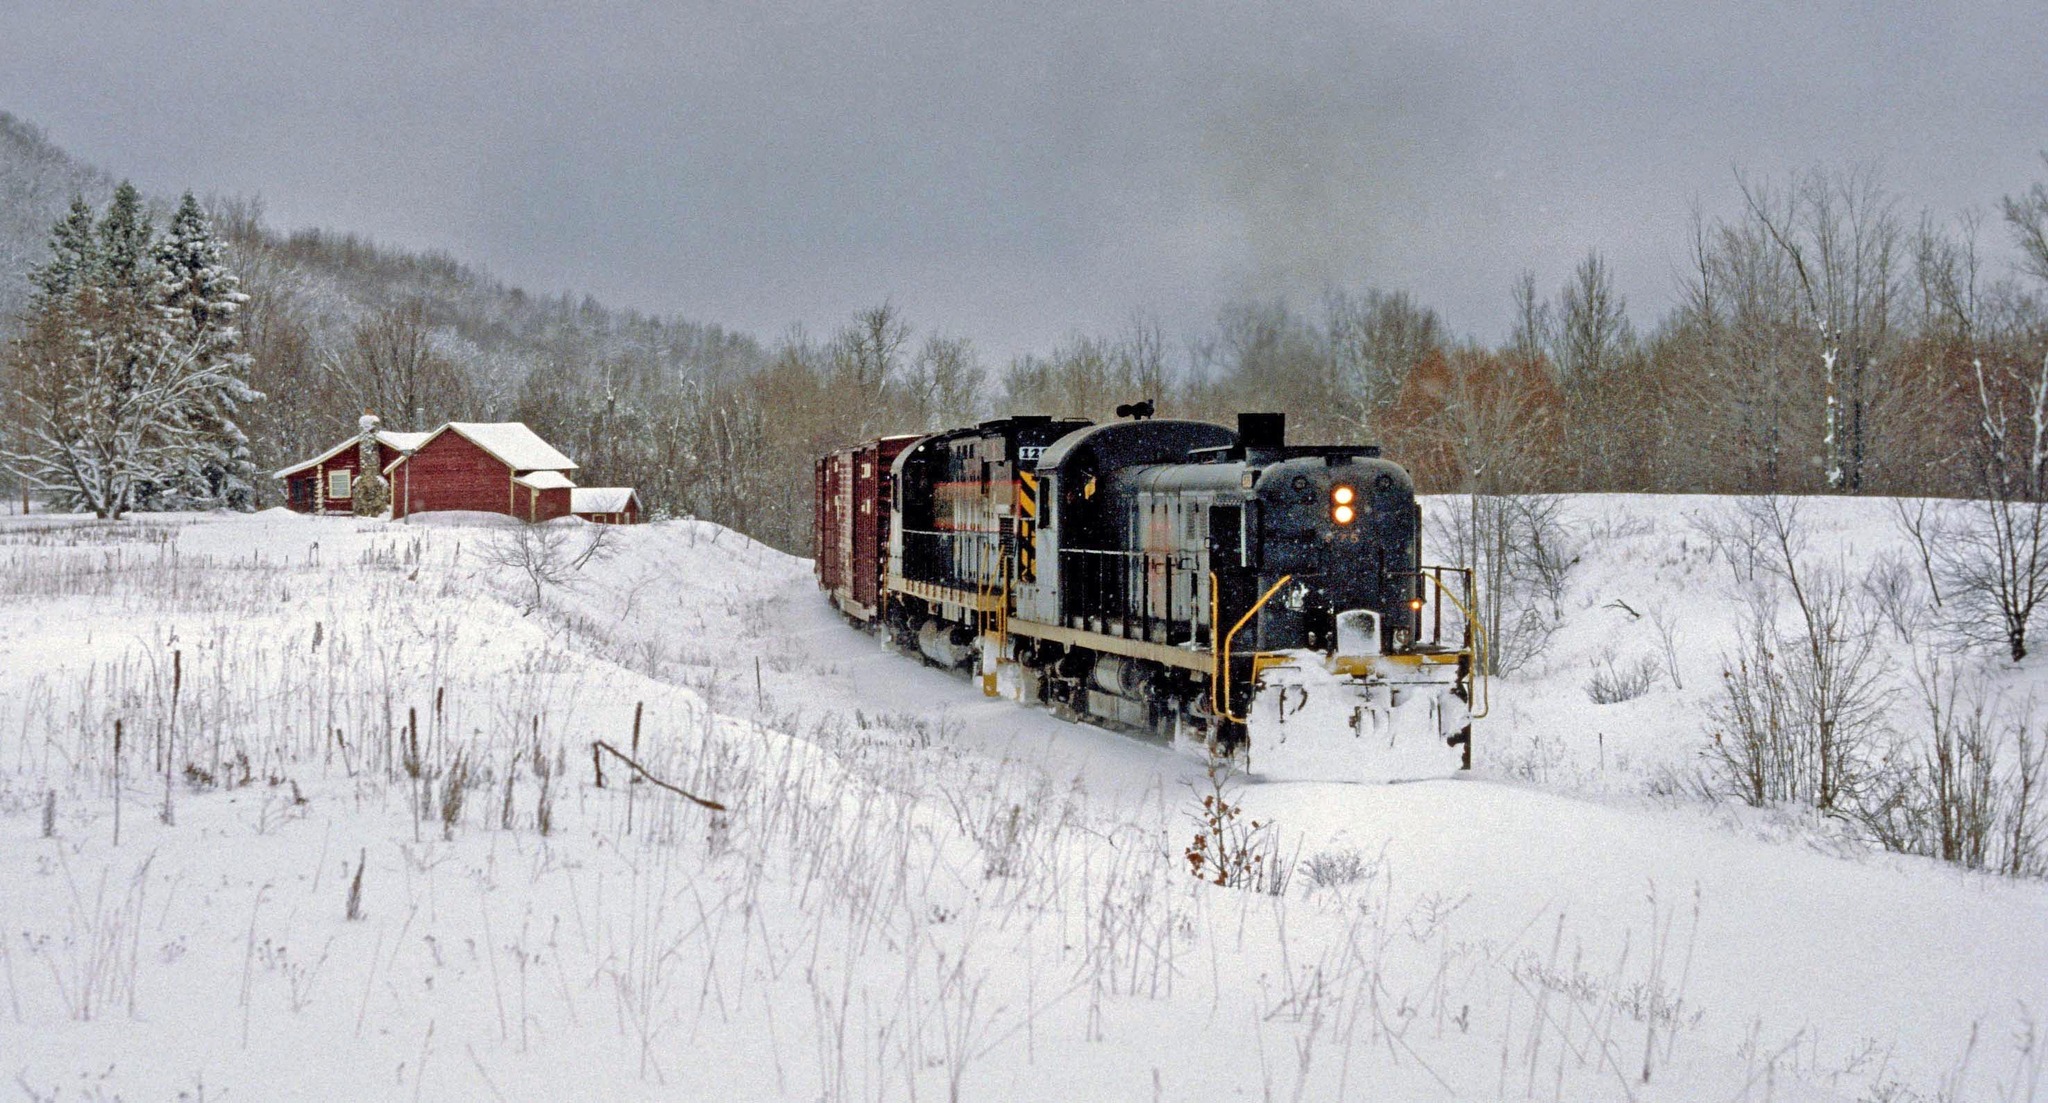 D&M train At Wolverine in winter